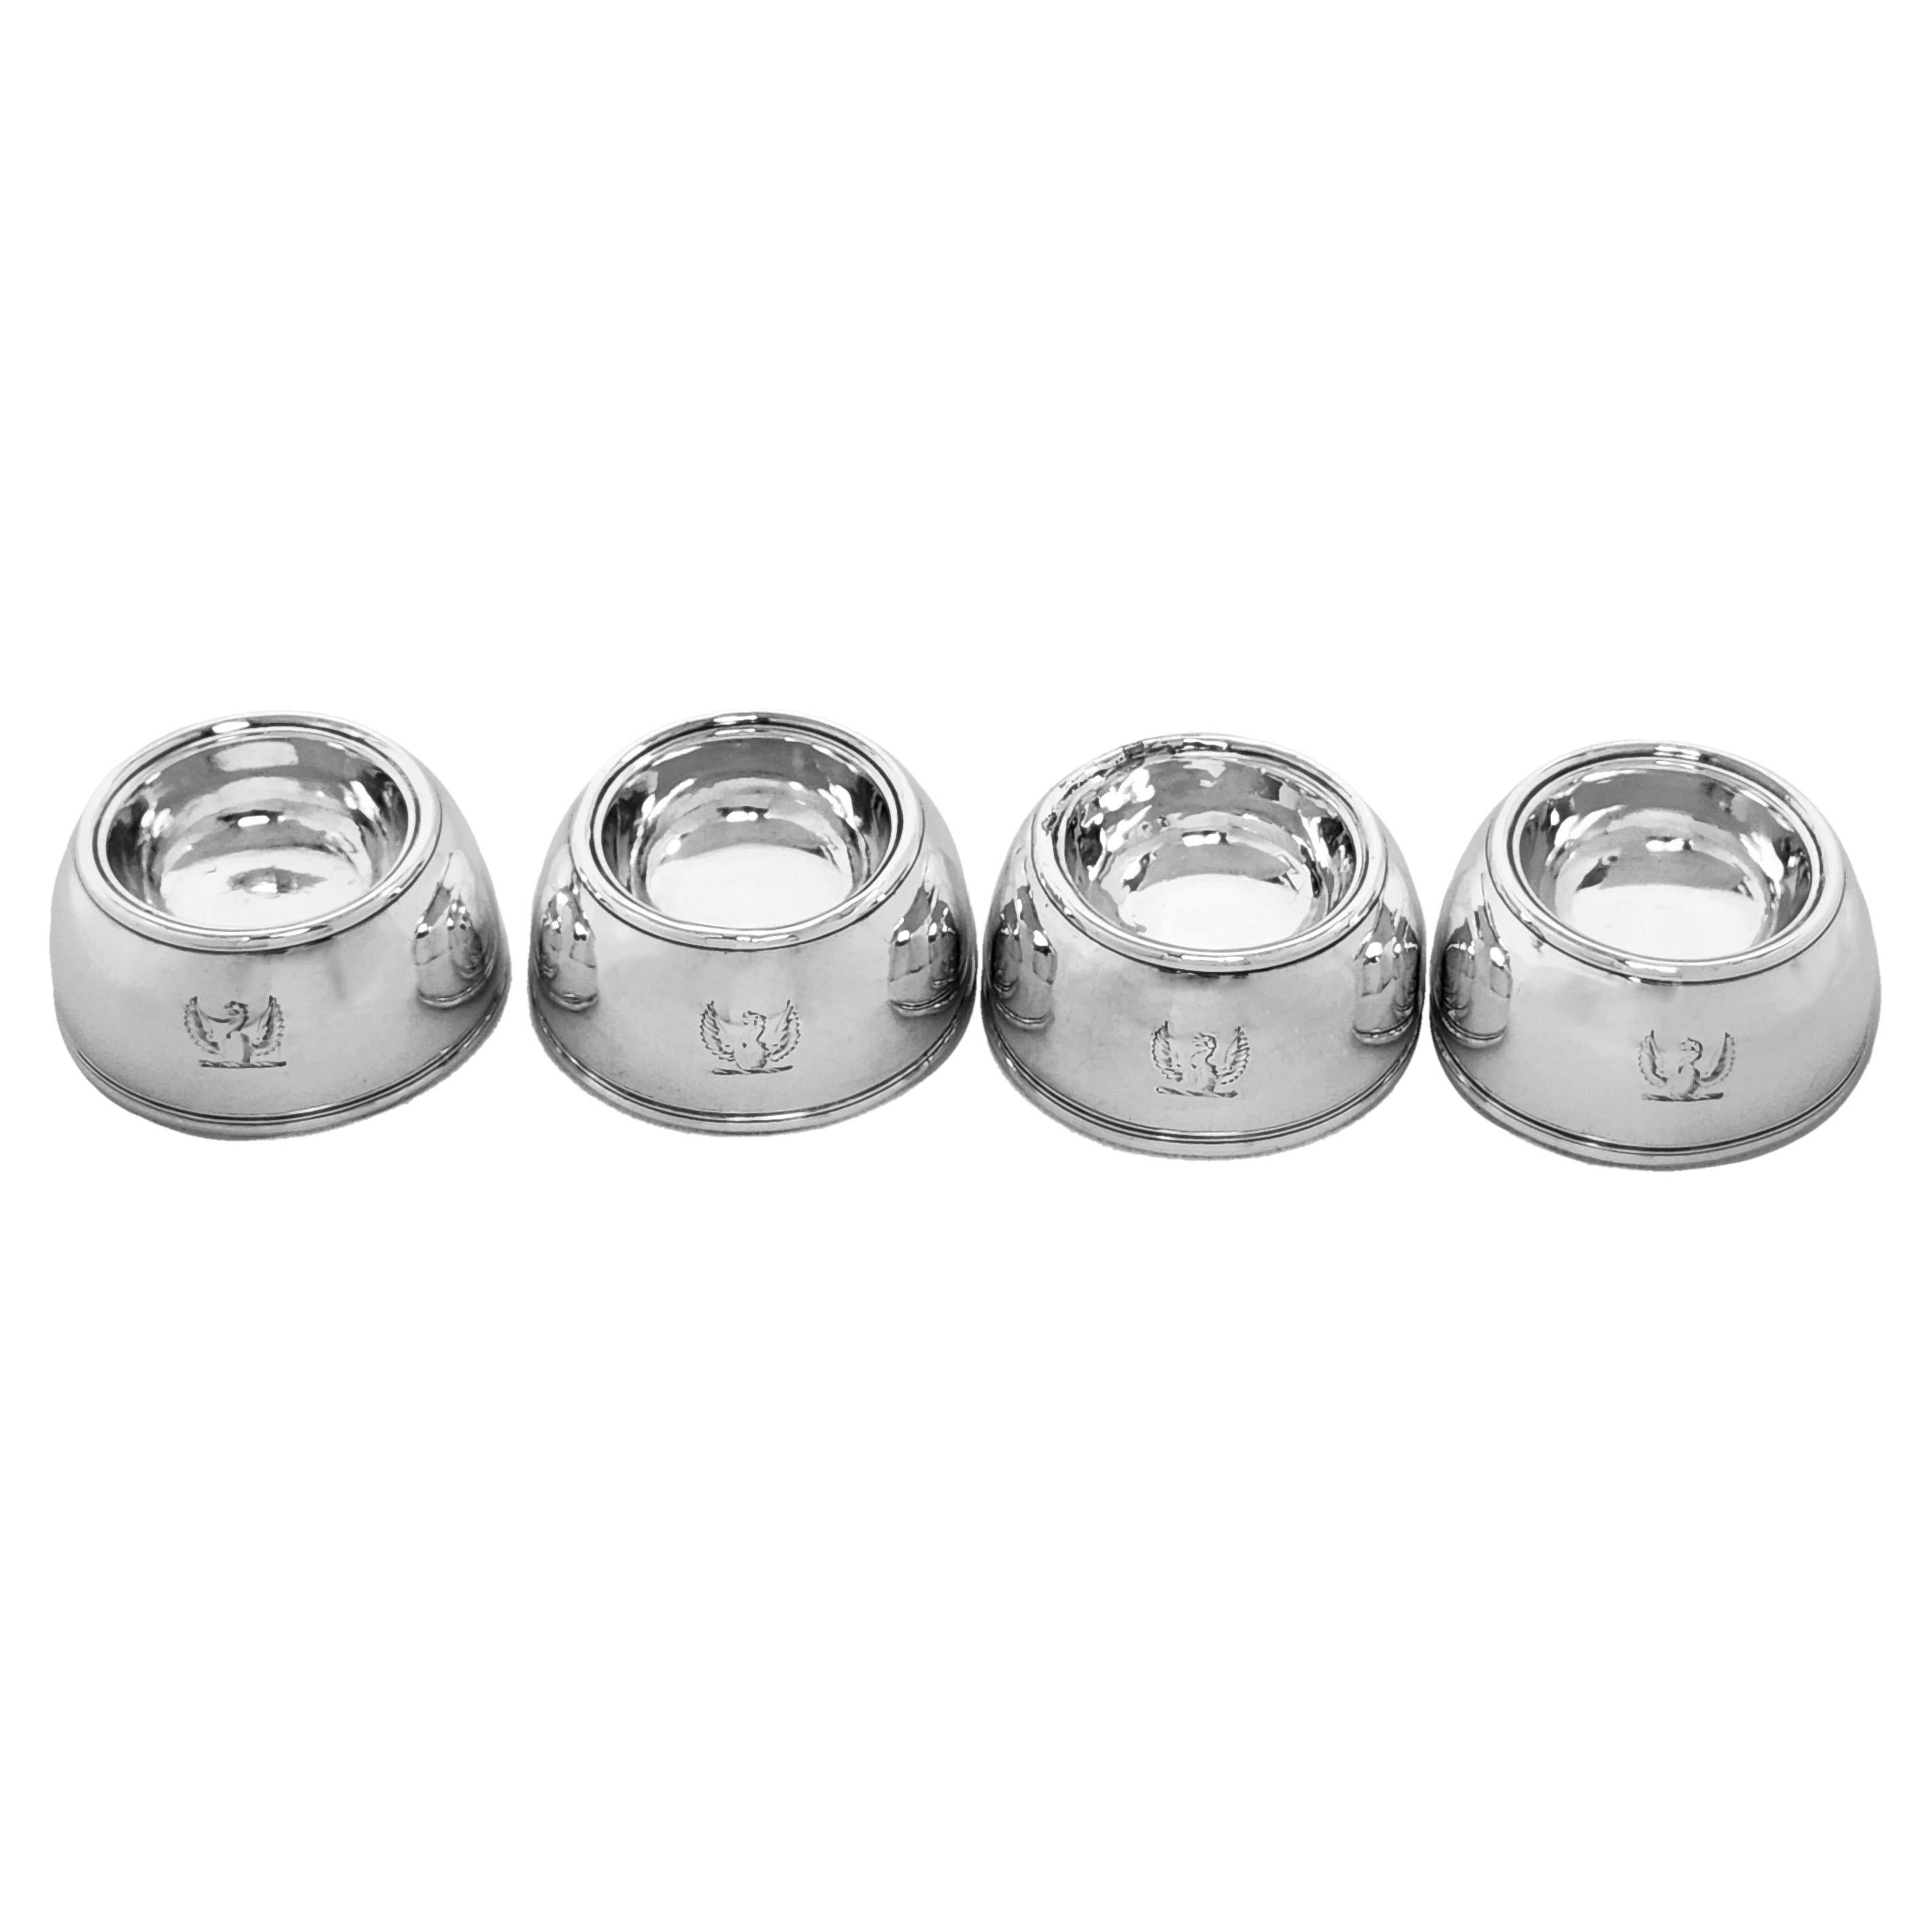 A set of 4 Antique Queen Anne Silver Salts. The early 18th Century Salts are in a classic round trencher shape and each has a small crest of a bird engraved on the side.

Made in London, England in 1714 by William Fleming.

Approx. Total Weight -